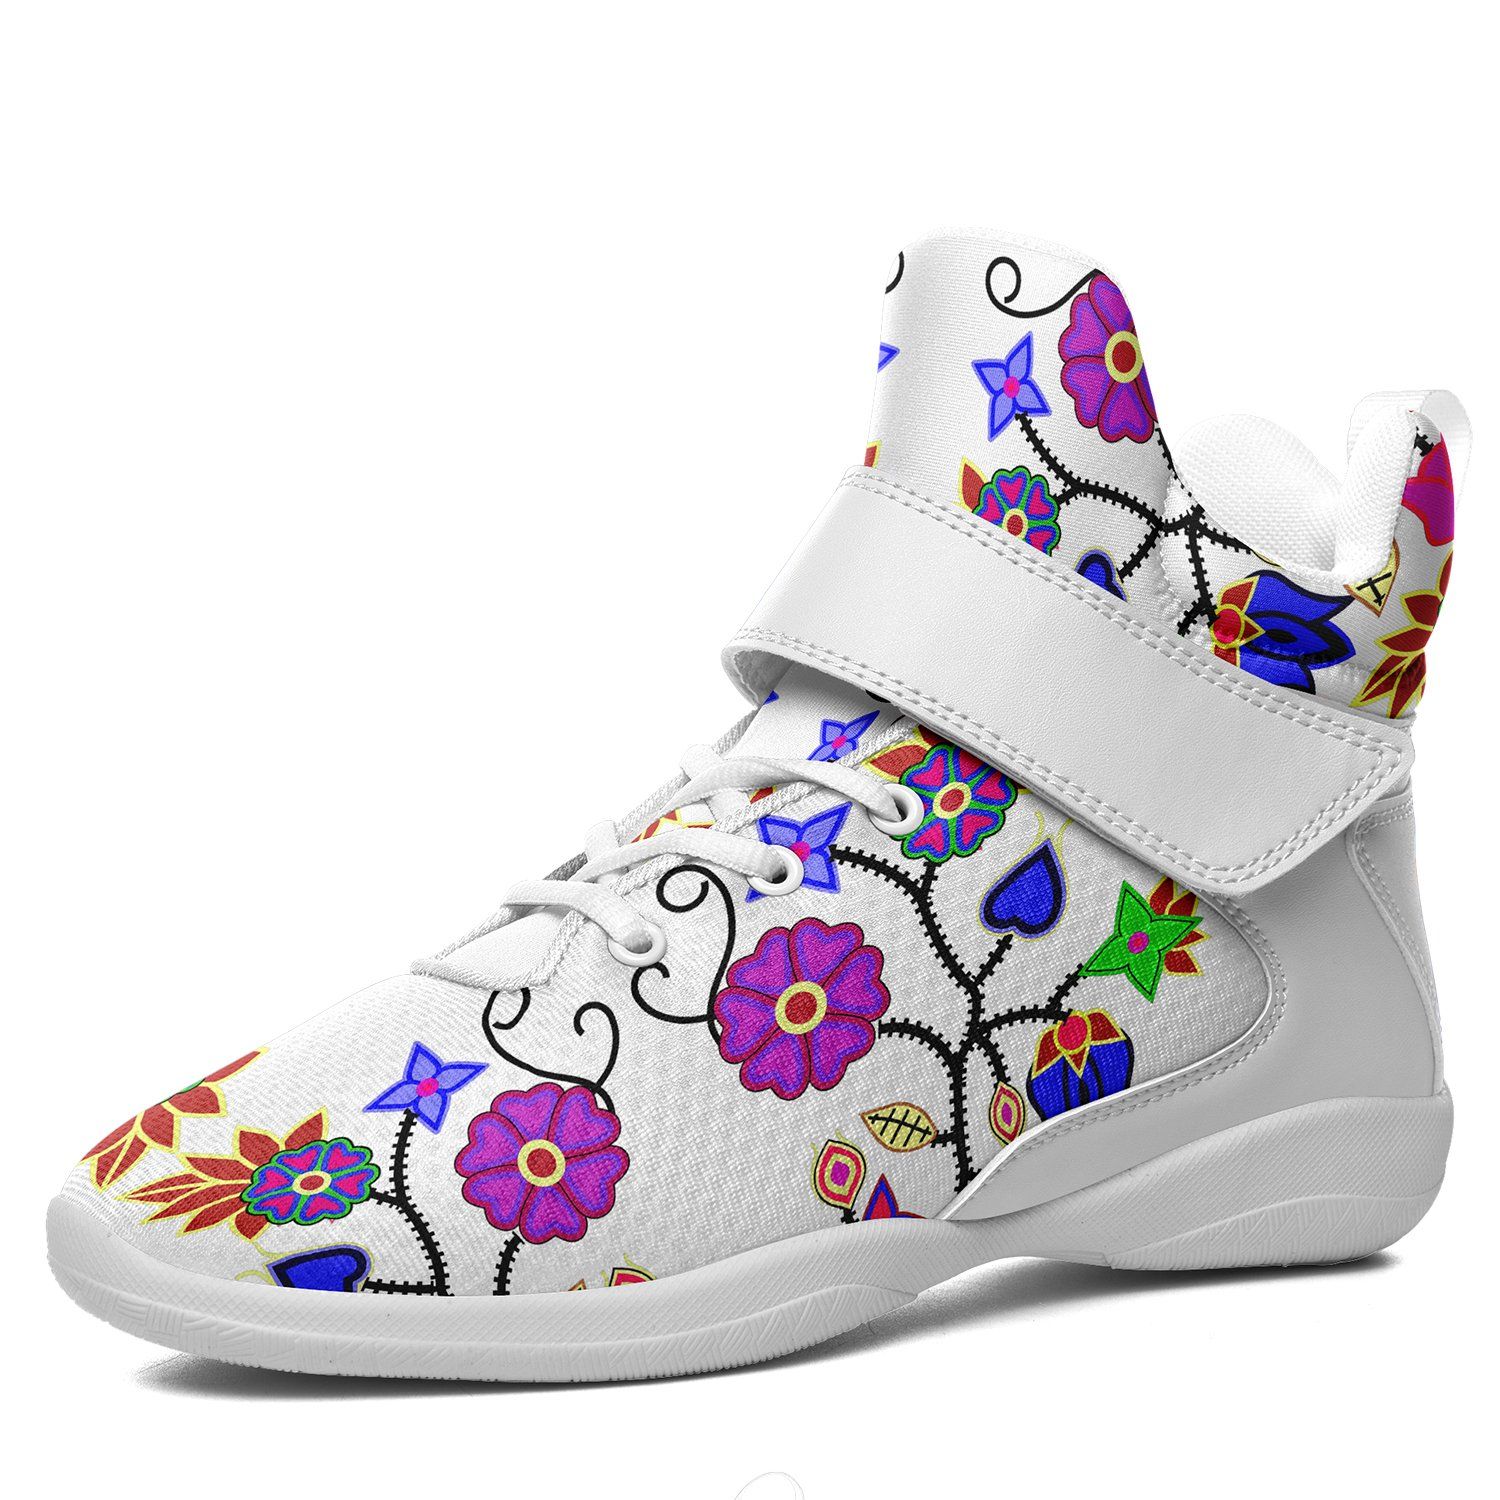 Floral Beadwork Seven Clans White Ipottaa Basketball / Sport High Top Shoes 49 Dzine 